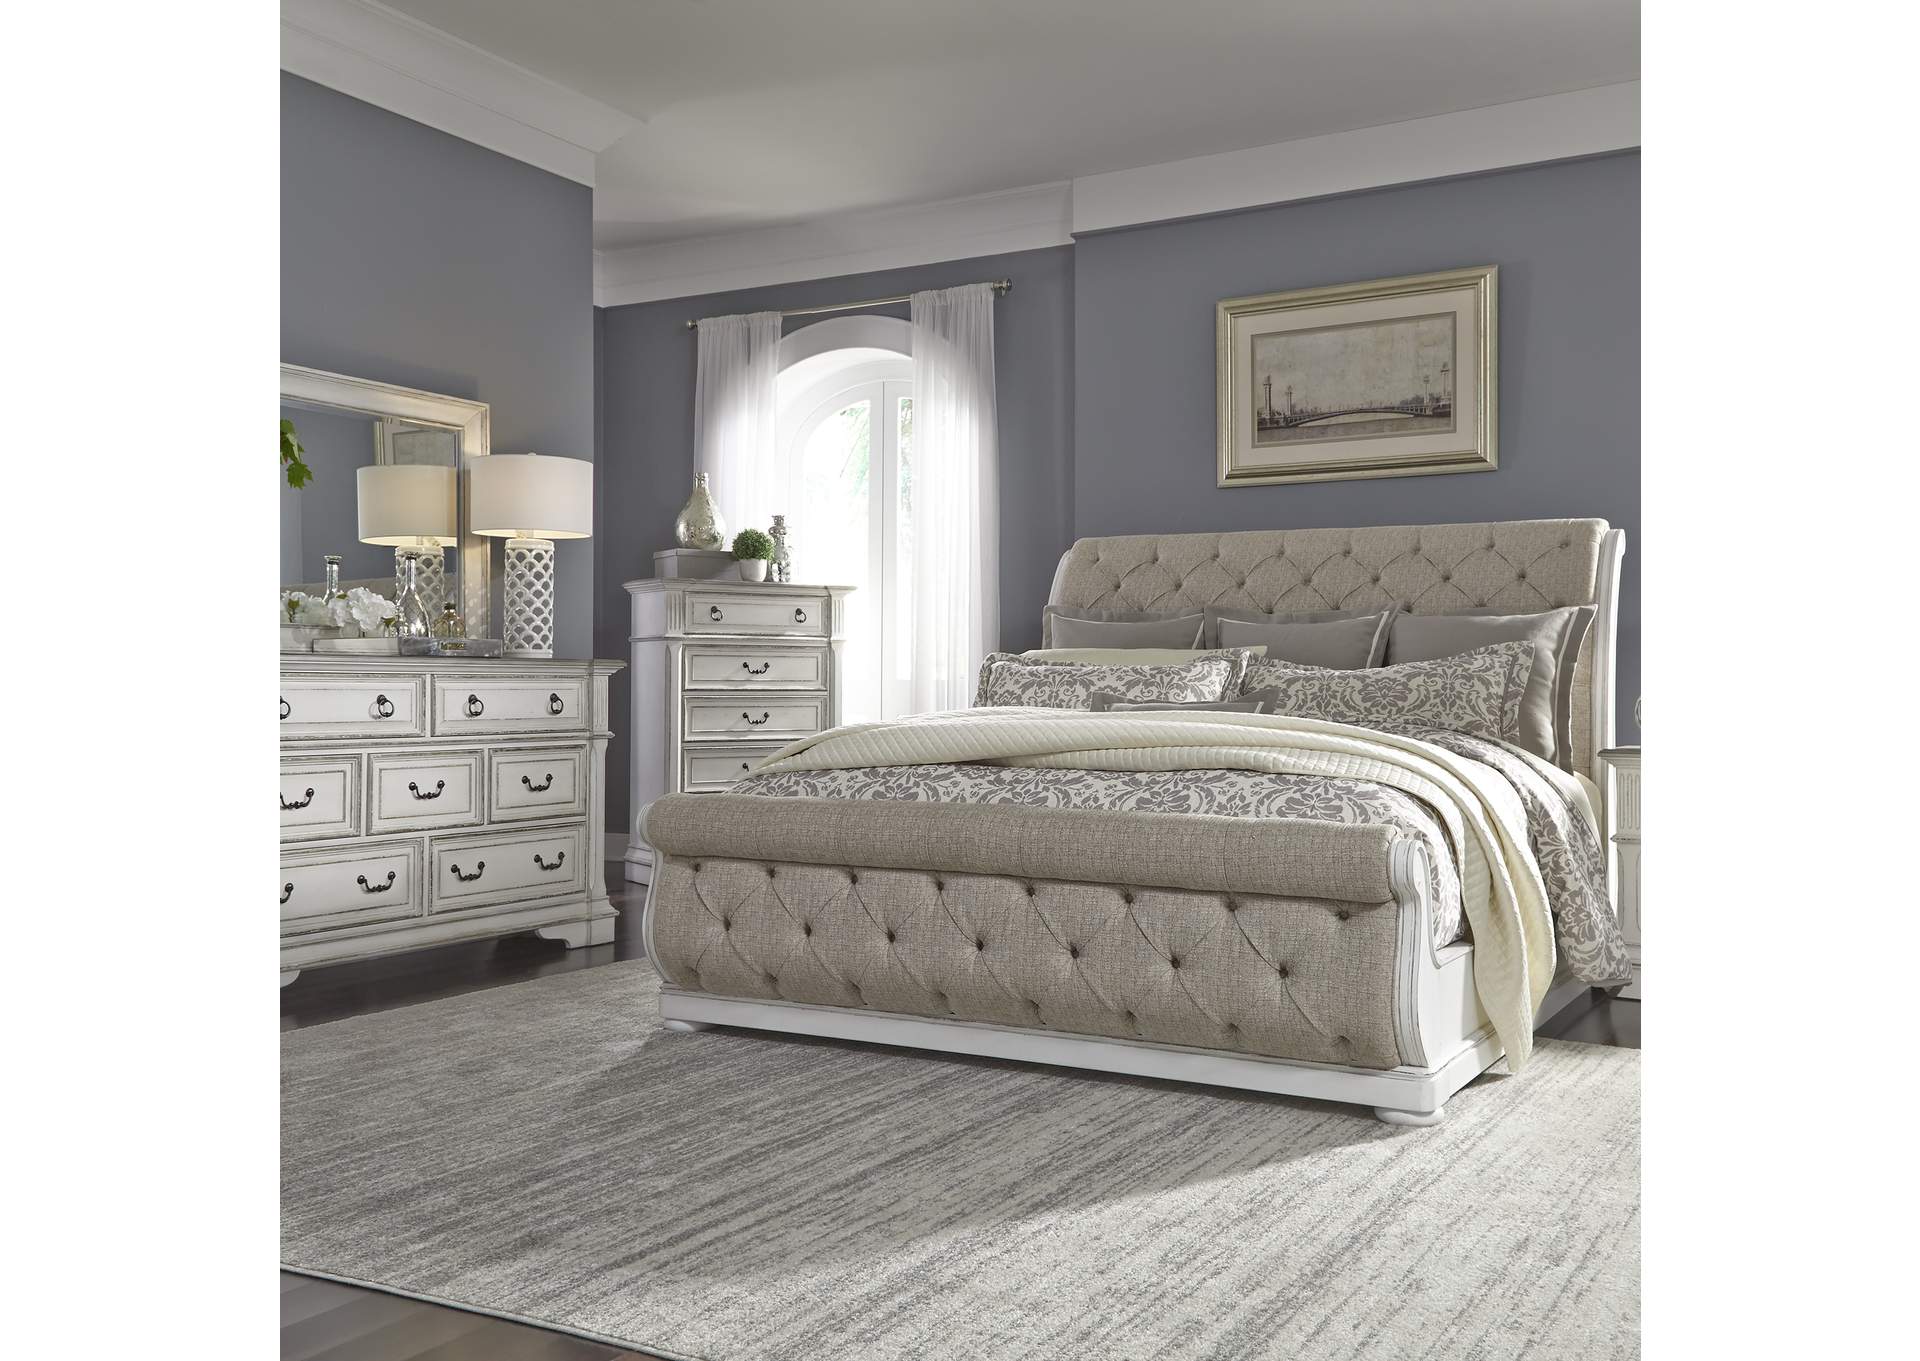 Abbey Park King Upholstered Sleigh Bed, Dresser & Mirror, Chest,Liberty